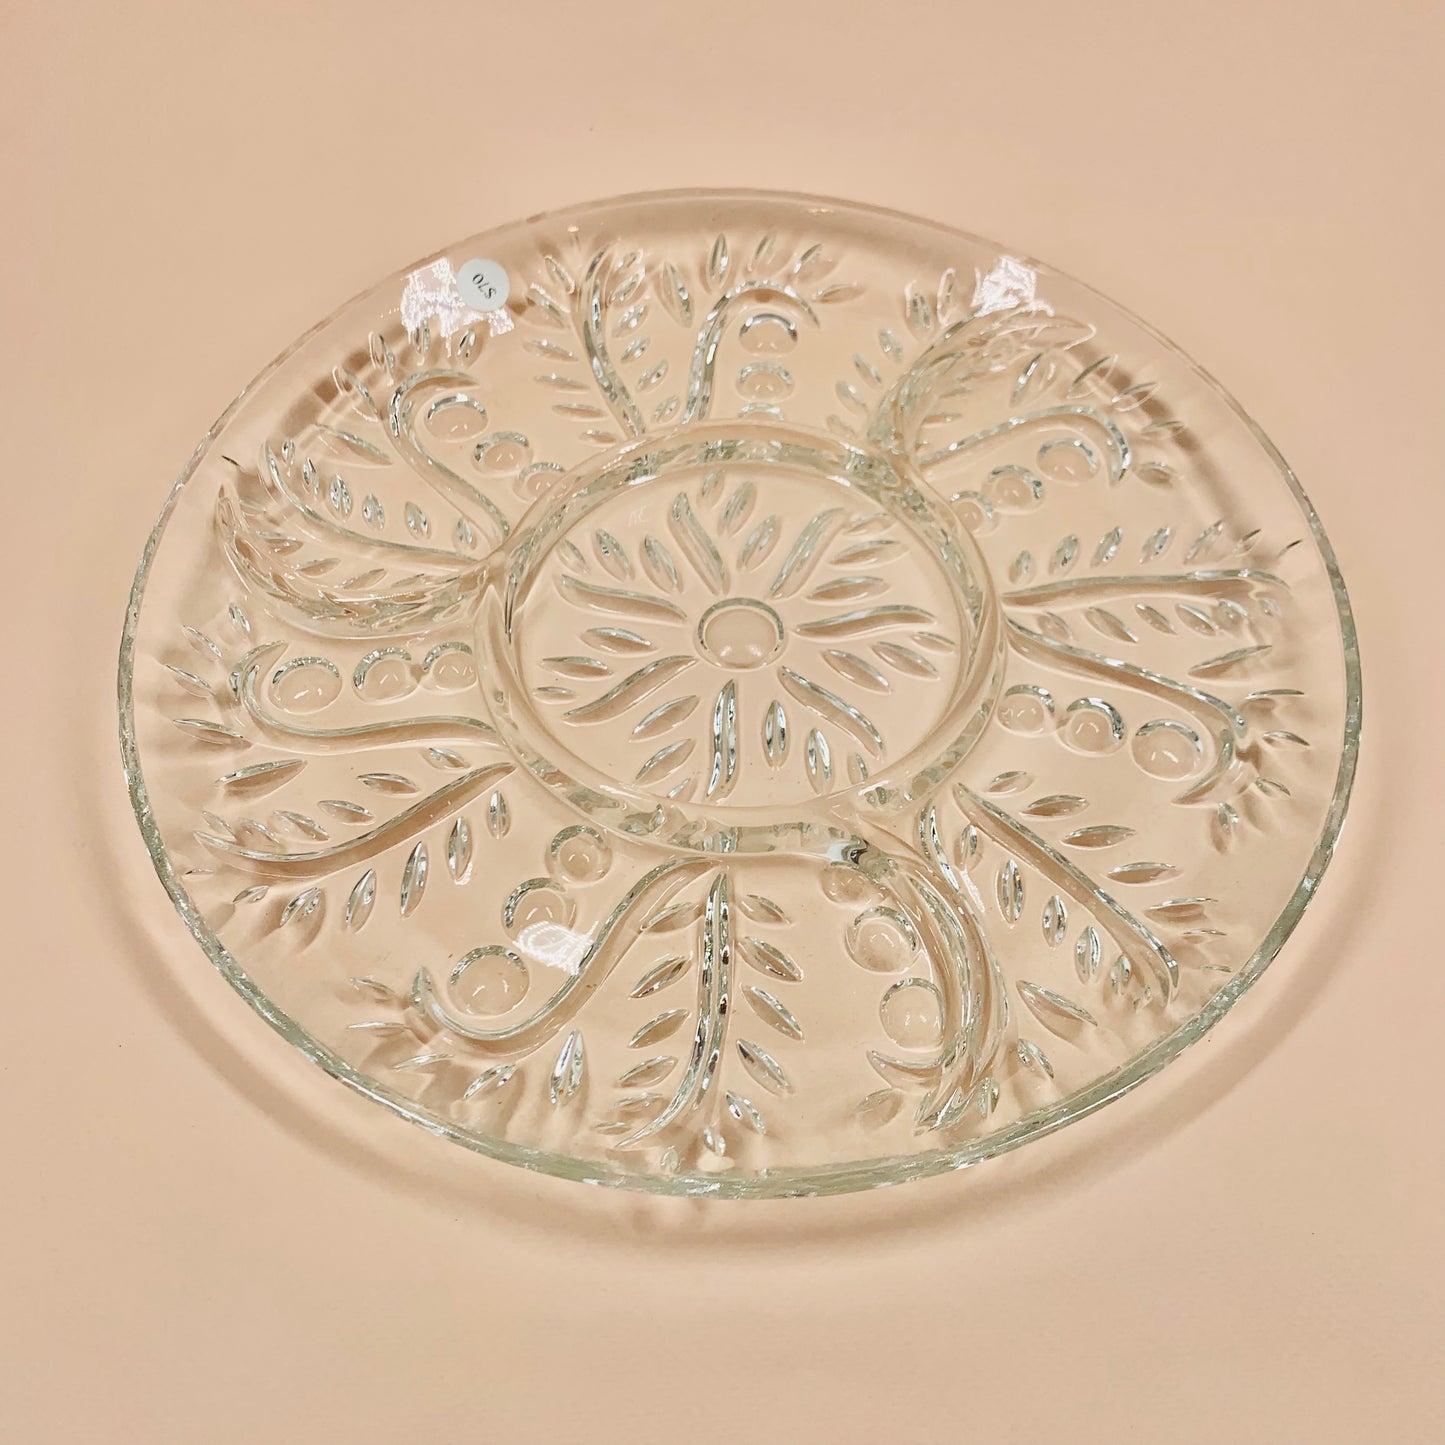 Midcentury pressed glass plate with food divider